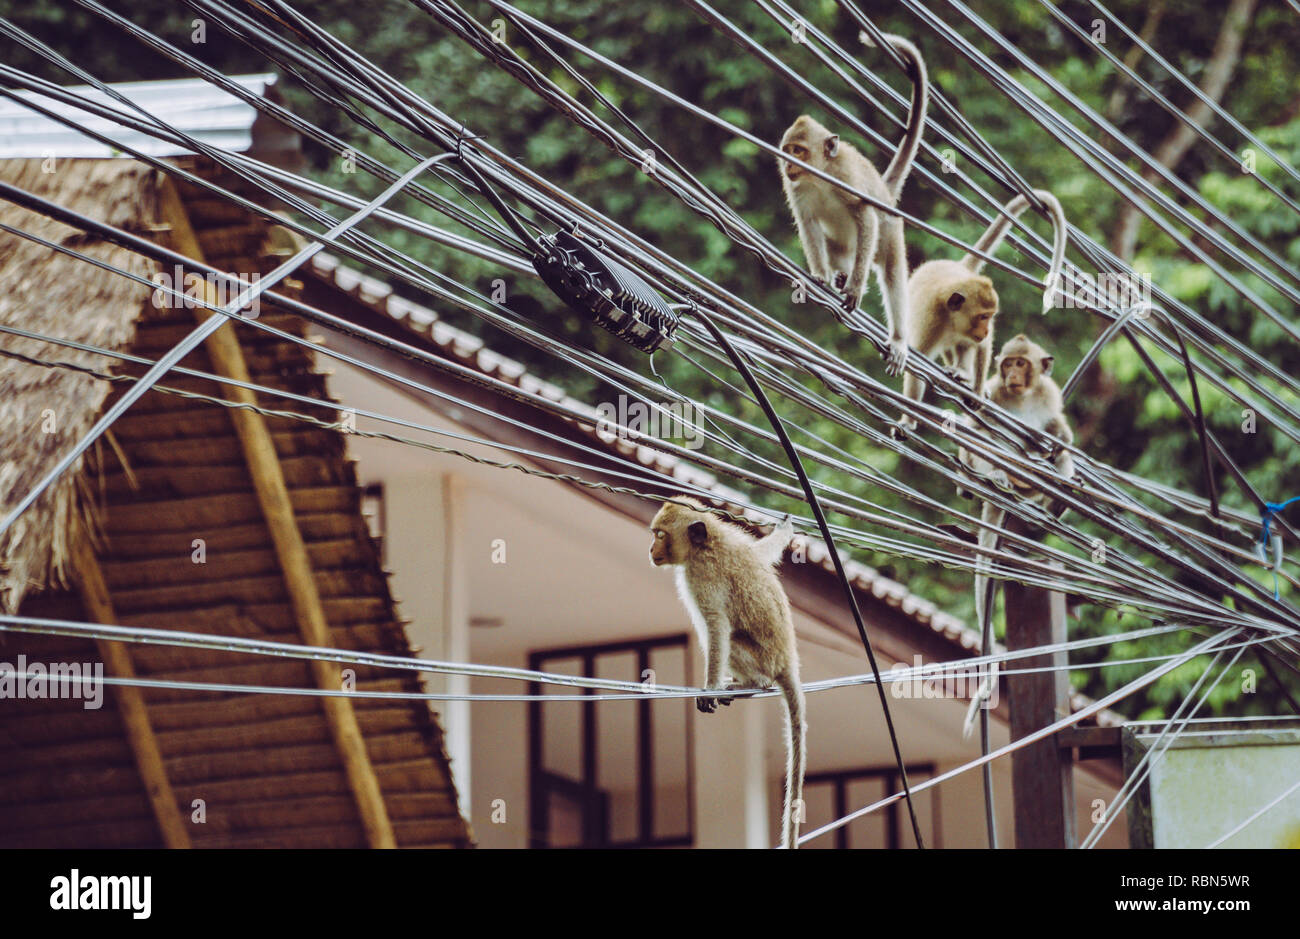 Monkeys climbing on electricity wires in Thailand Stock Photo - Alamy